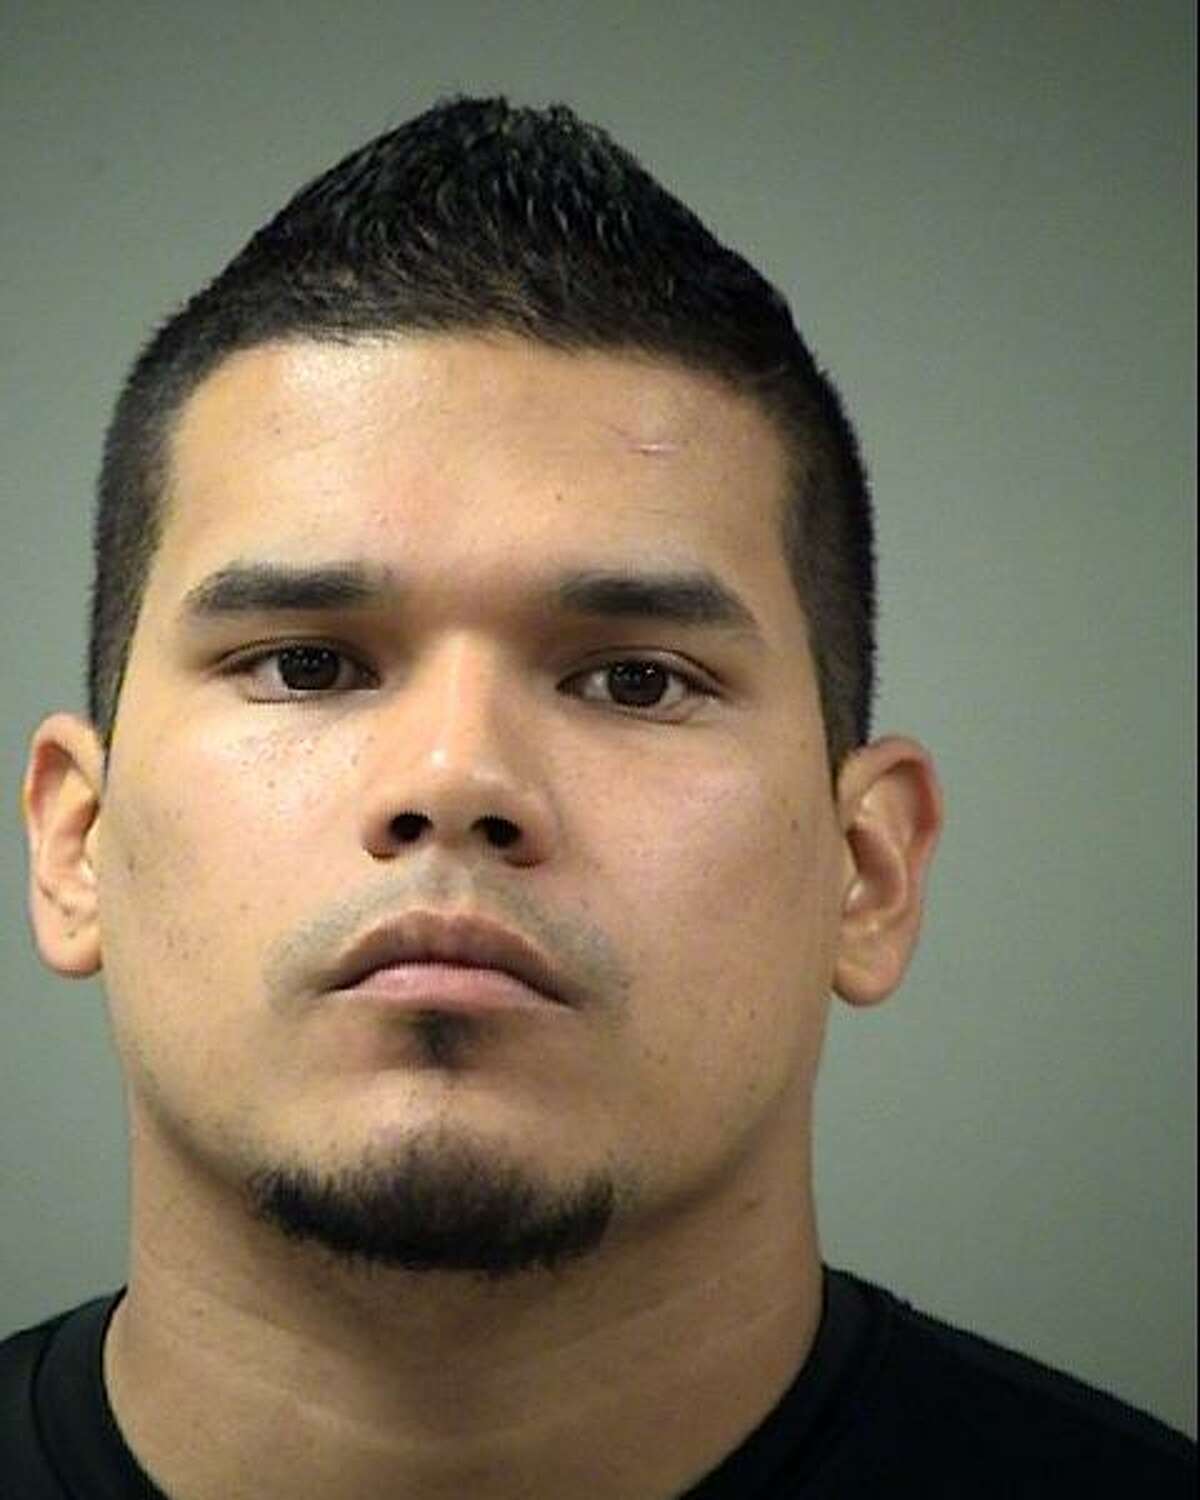 Former Bexar County Deputy Michael Gomez, 30, seen in a booking photo, was indicted Wednesday on a charge of official oppression, the sheriff announced. Gomez is one of two deputies accused of assaulting an inmate on June 6 at the Bexar County Jail.